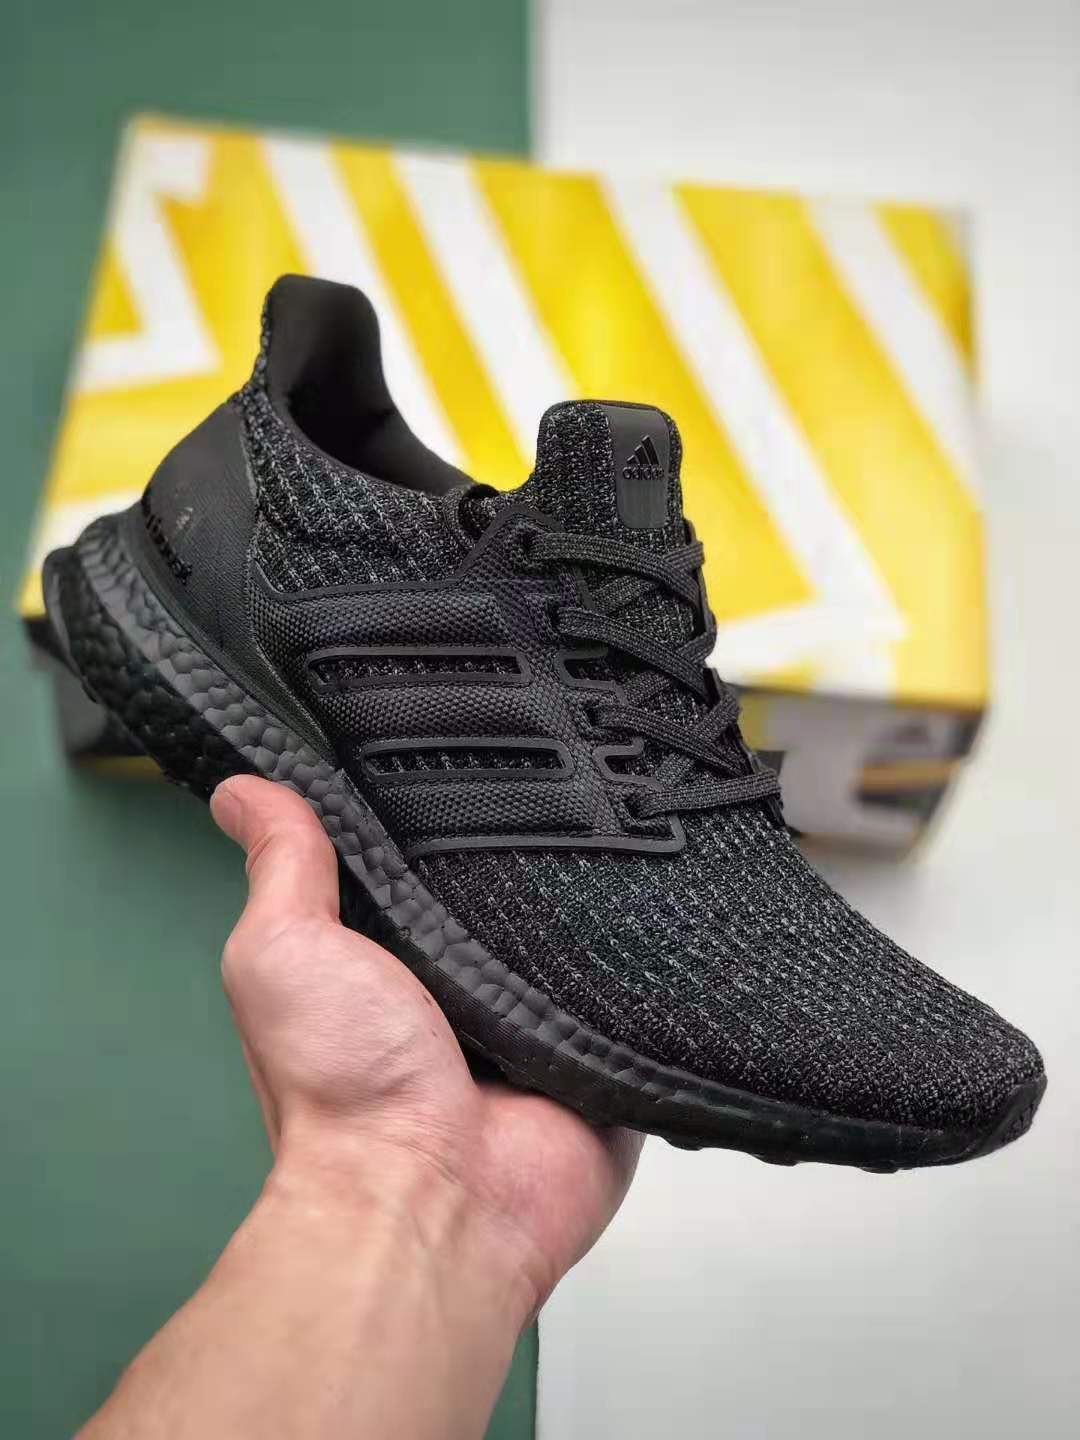 Adidas UltraBoost 4.0 'Triple Black' BB6171 - Sleek Style and Unmatched Performance